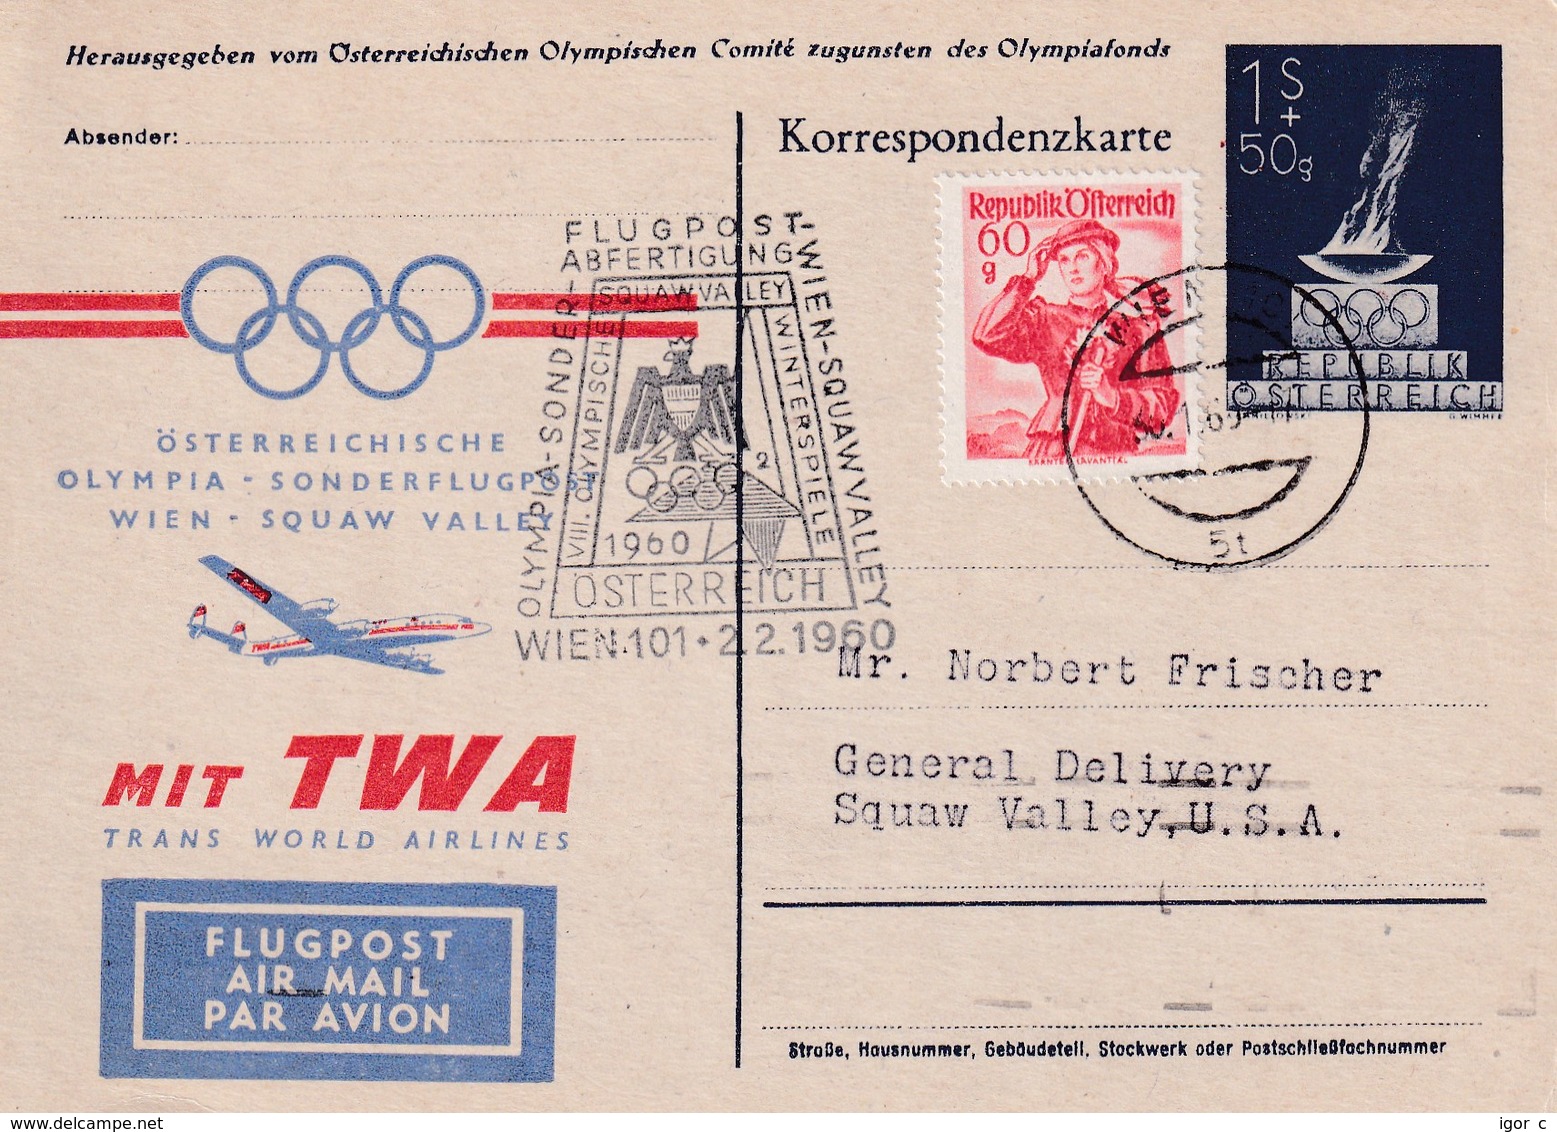 Austria 1960 Air Mail Postal Stationery Card; TWA Trans World Airlines Flight Vienna Squaw Valley; Eagle Adler: 2 Scans - Hiver 1960: Squaw Valley